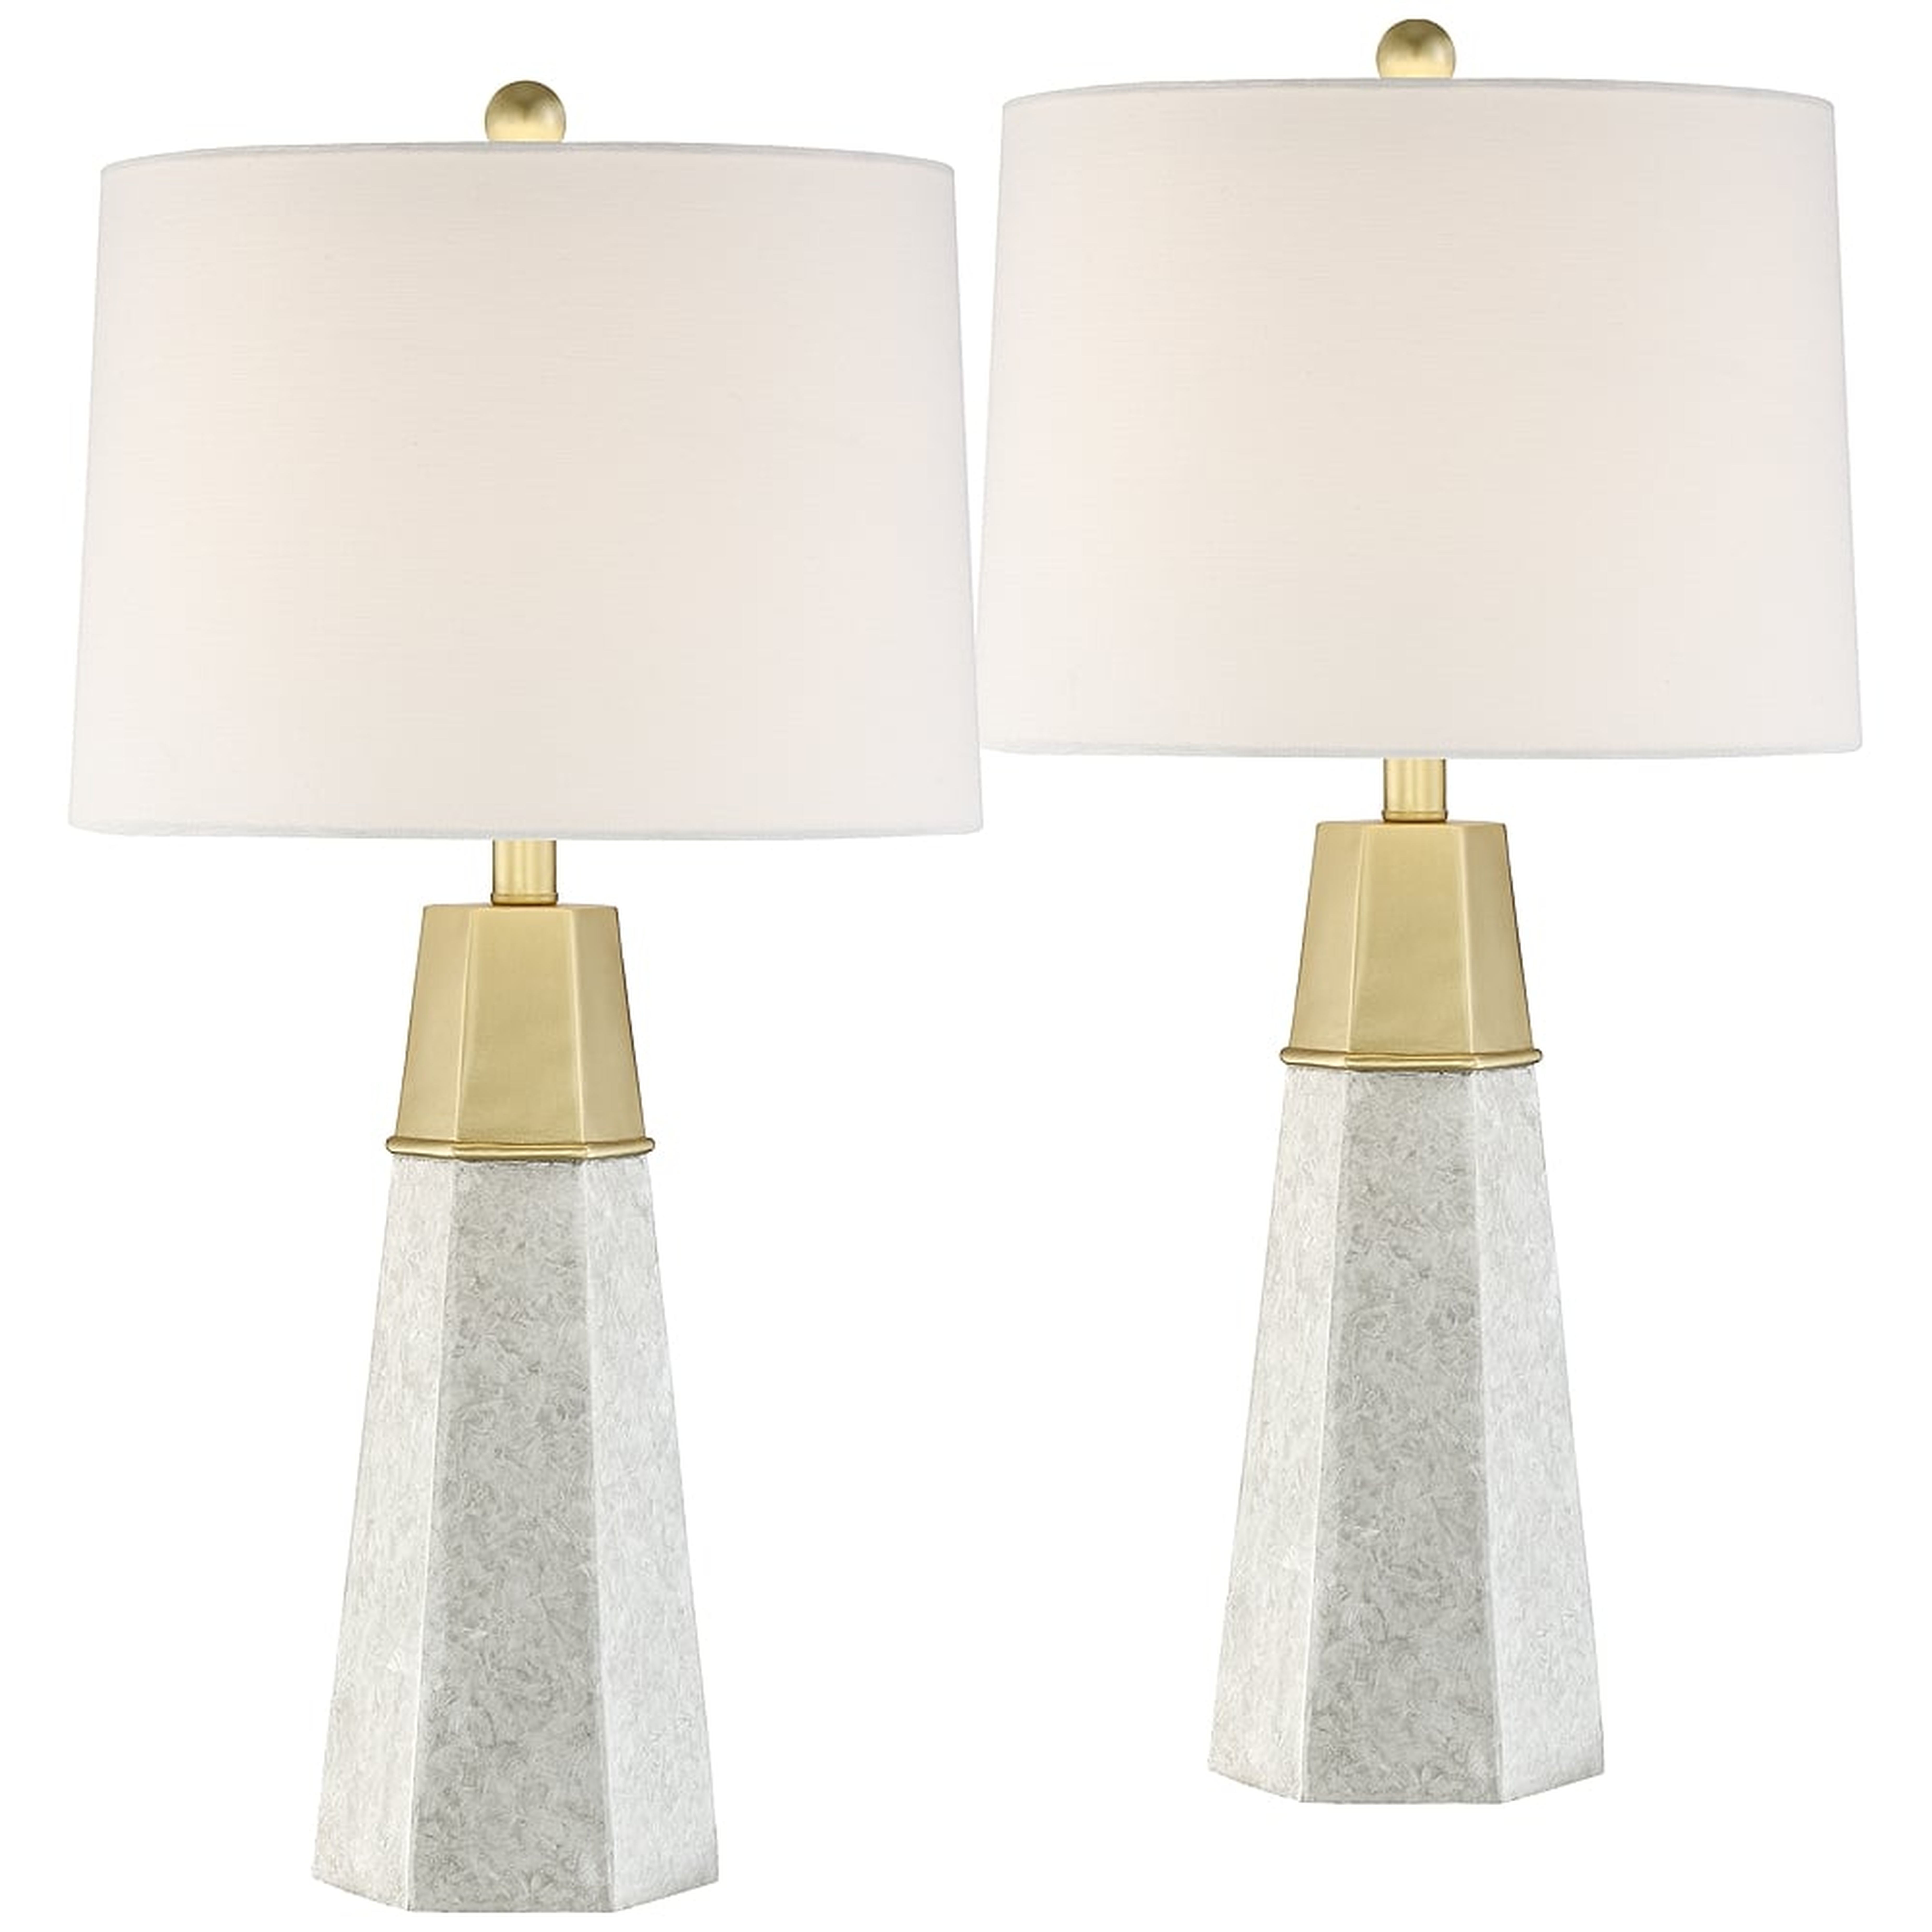 Julie Tapered Column Table Lamps Set of 2 - Style # 63R09 - Lamps Plus